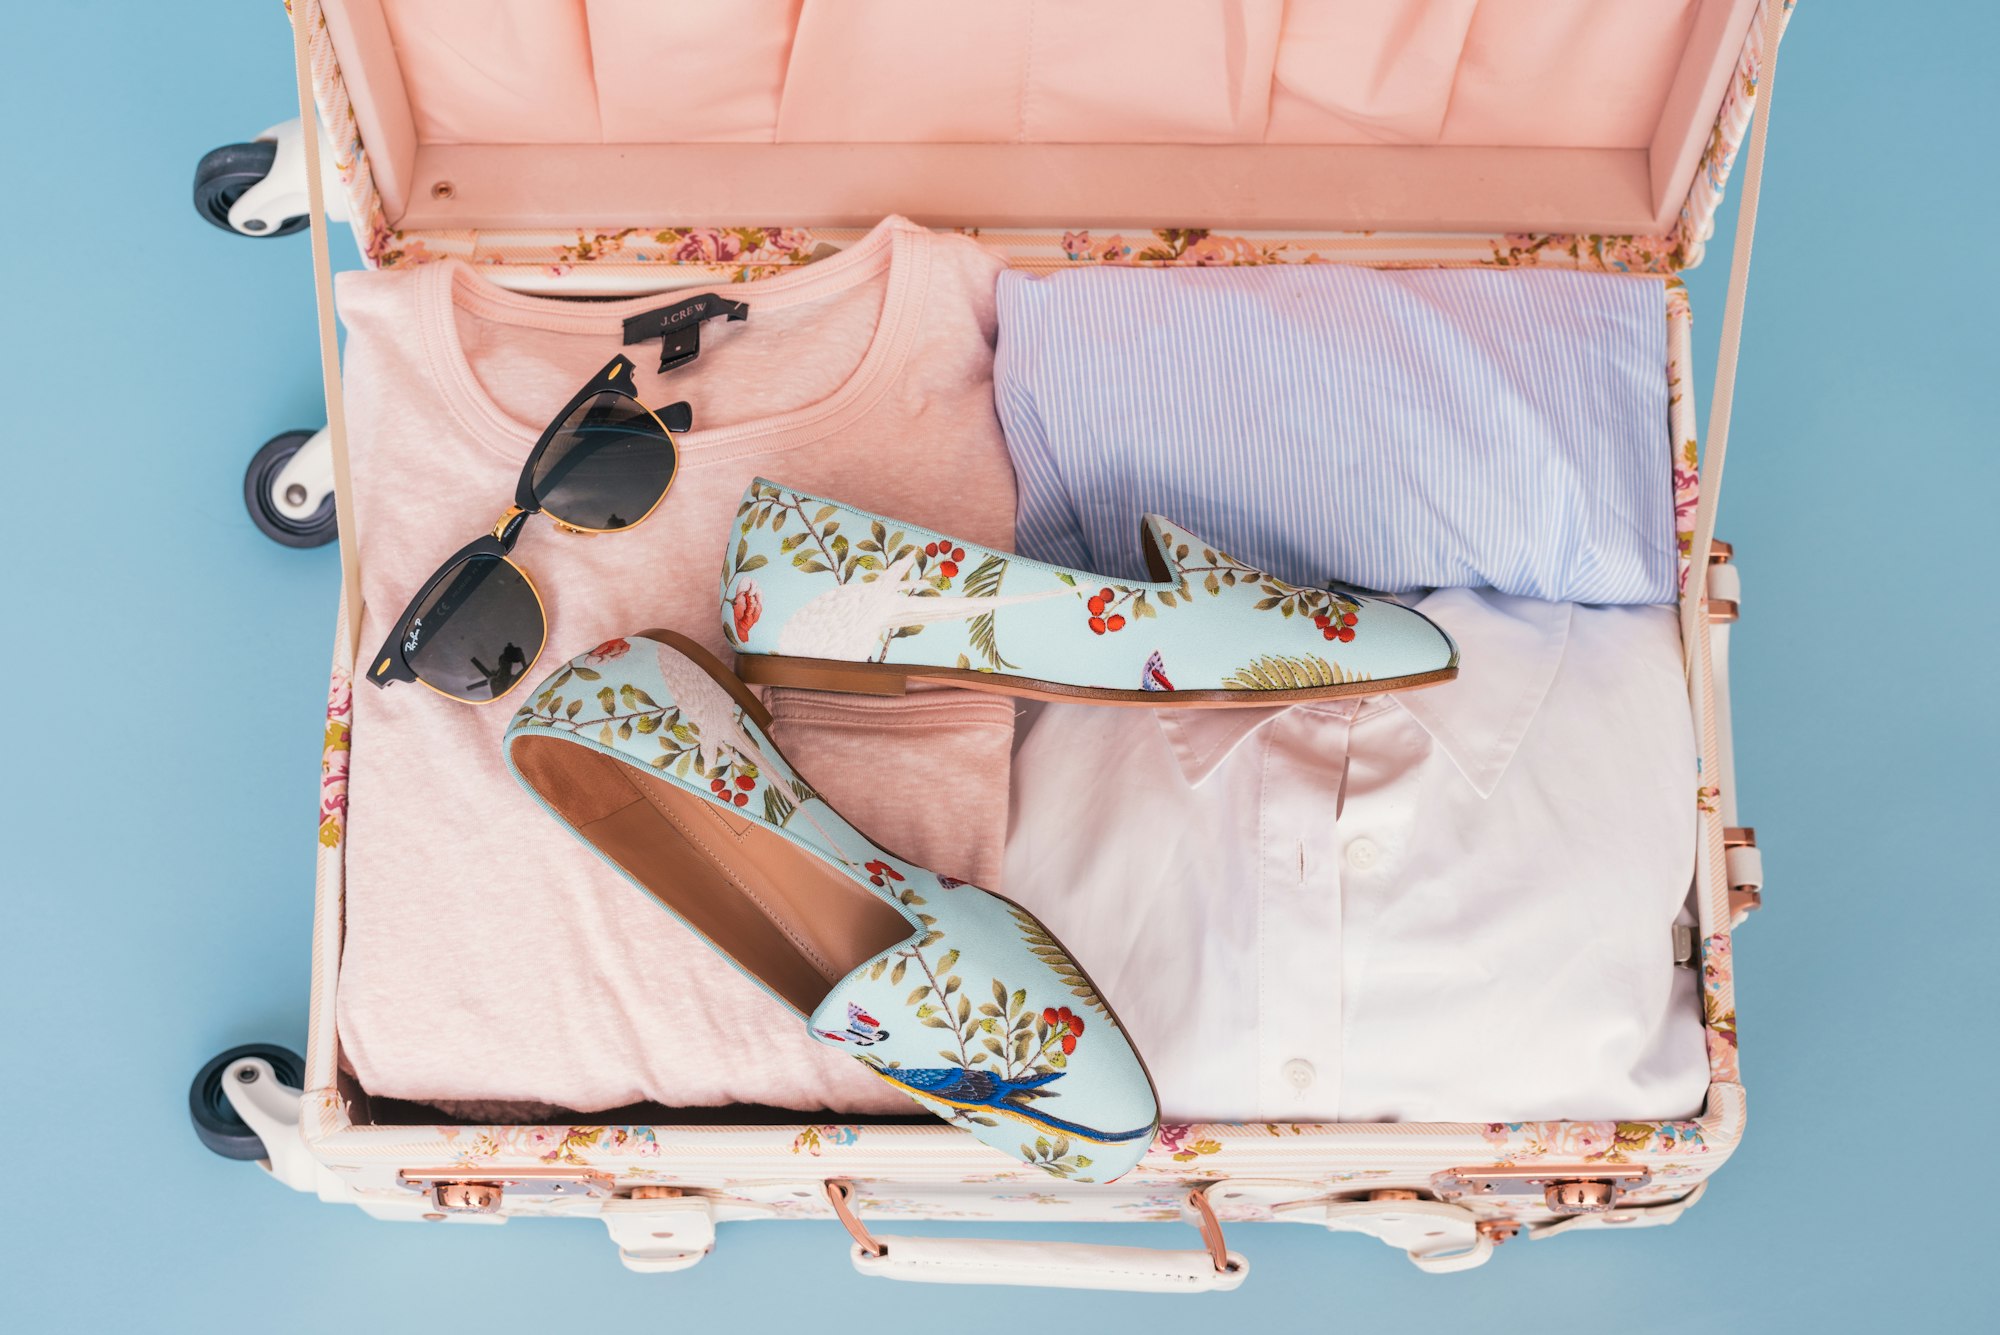 6 Travel Outfits That Will Make You Look like a Million Bucks